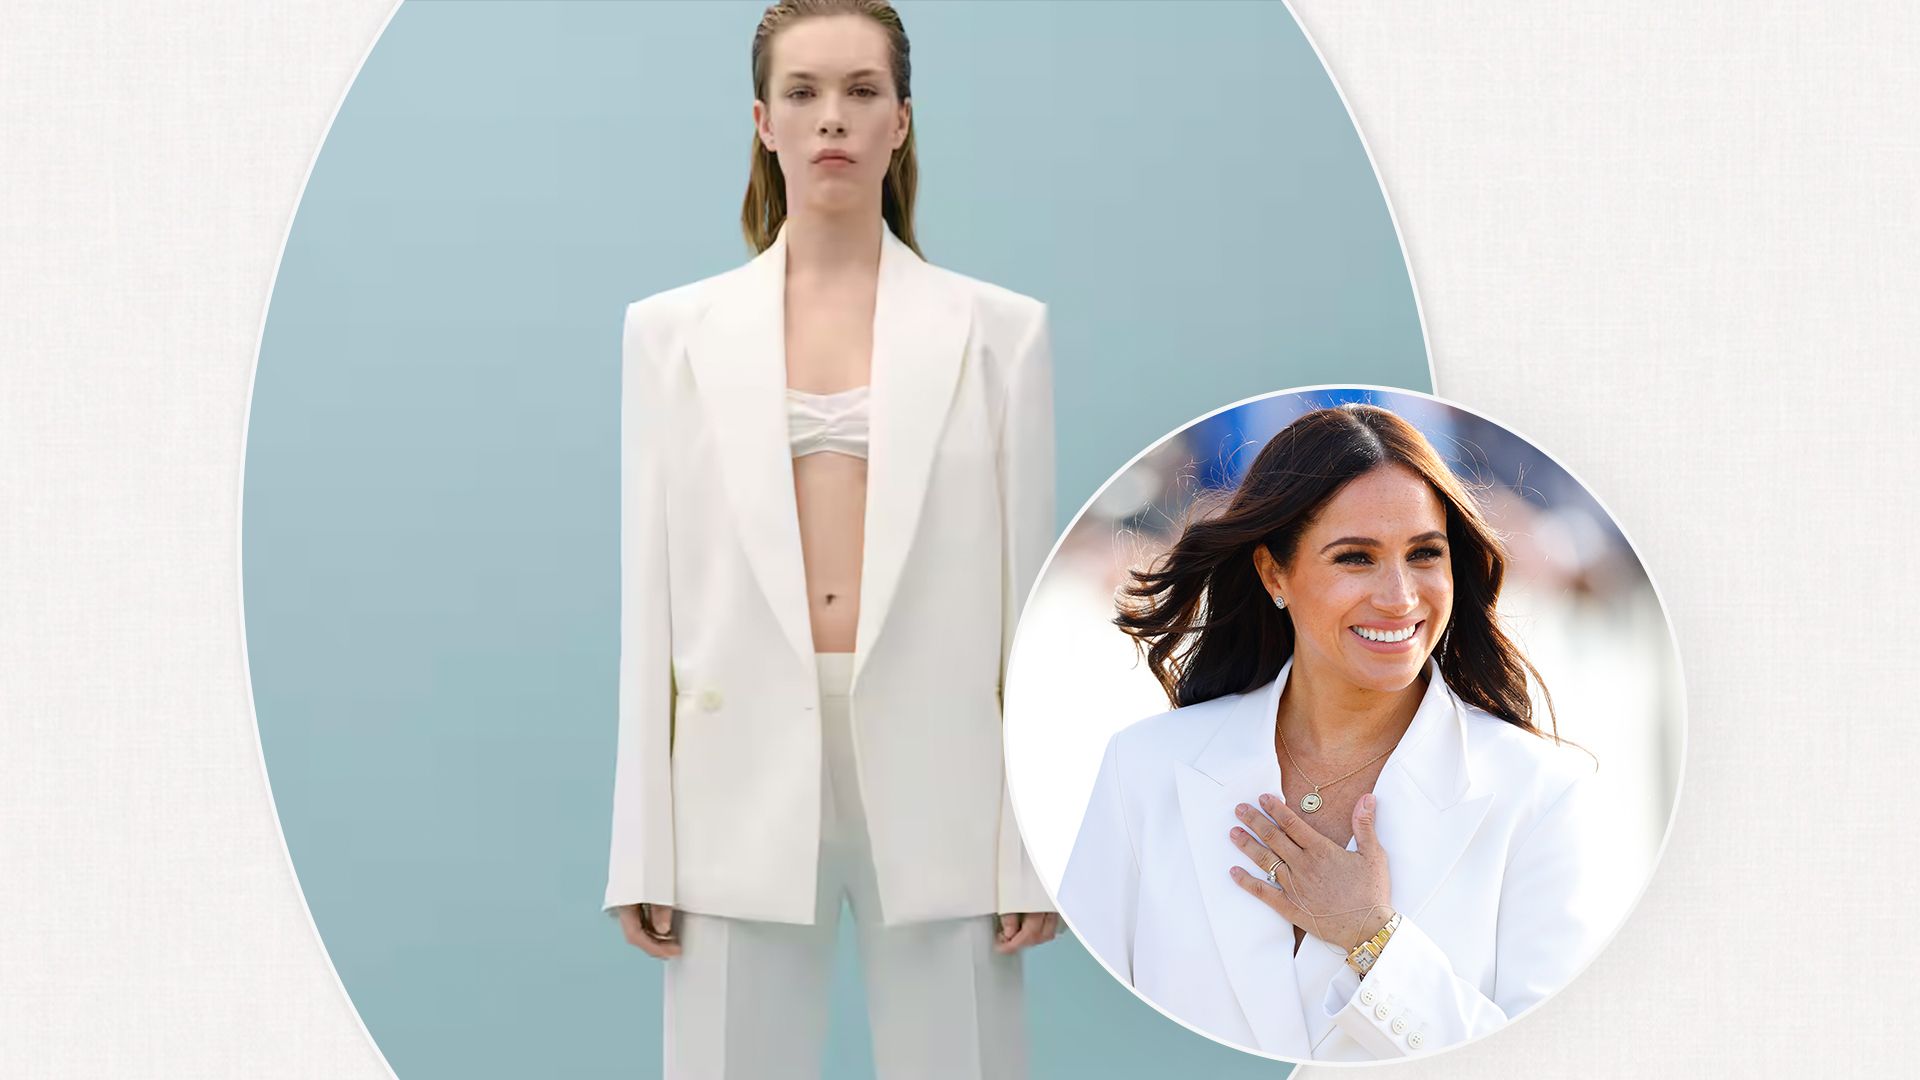 Victoria Beckham's white suit of dreams in her Mango collection is giving me major Meghan Markle vibes